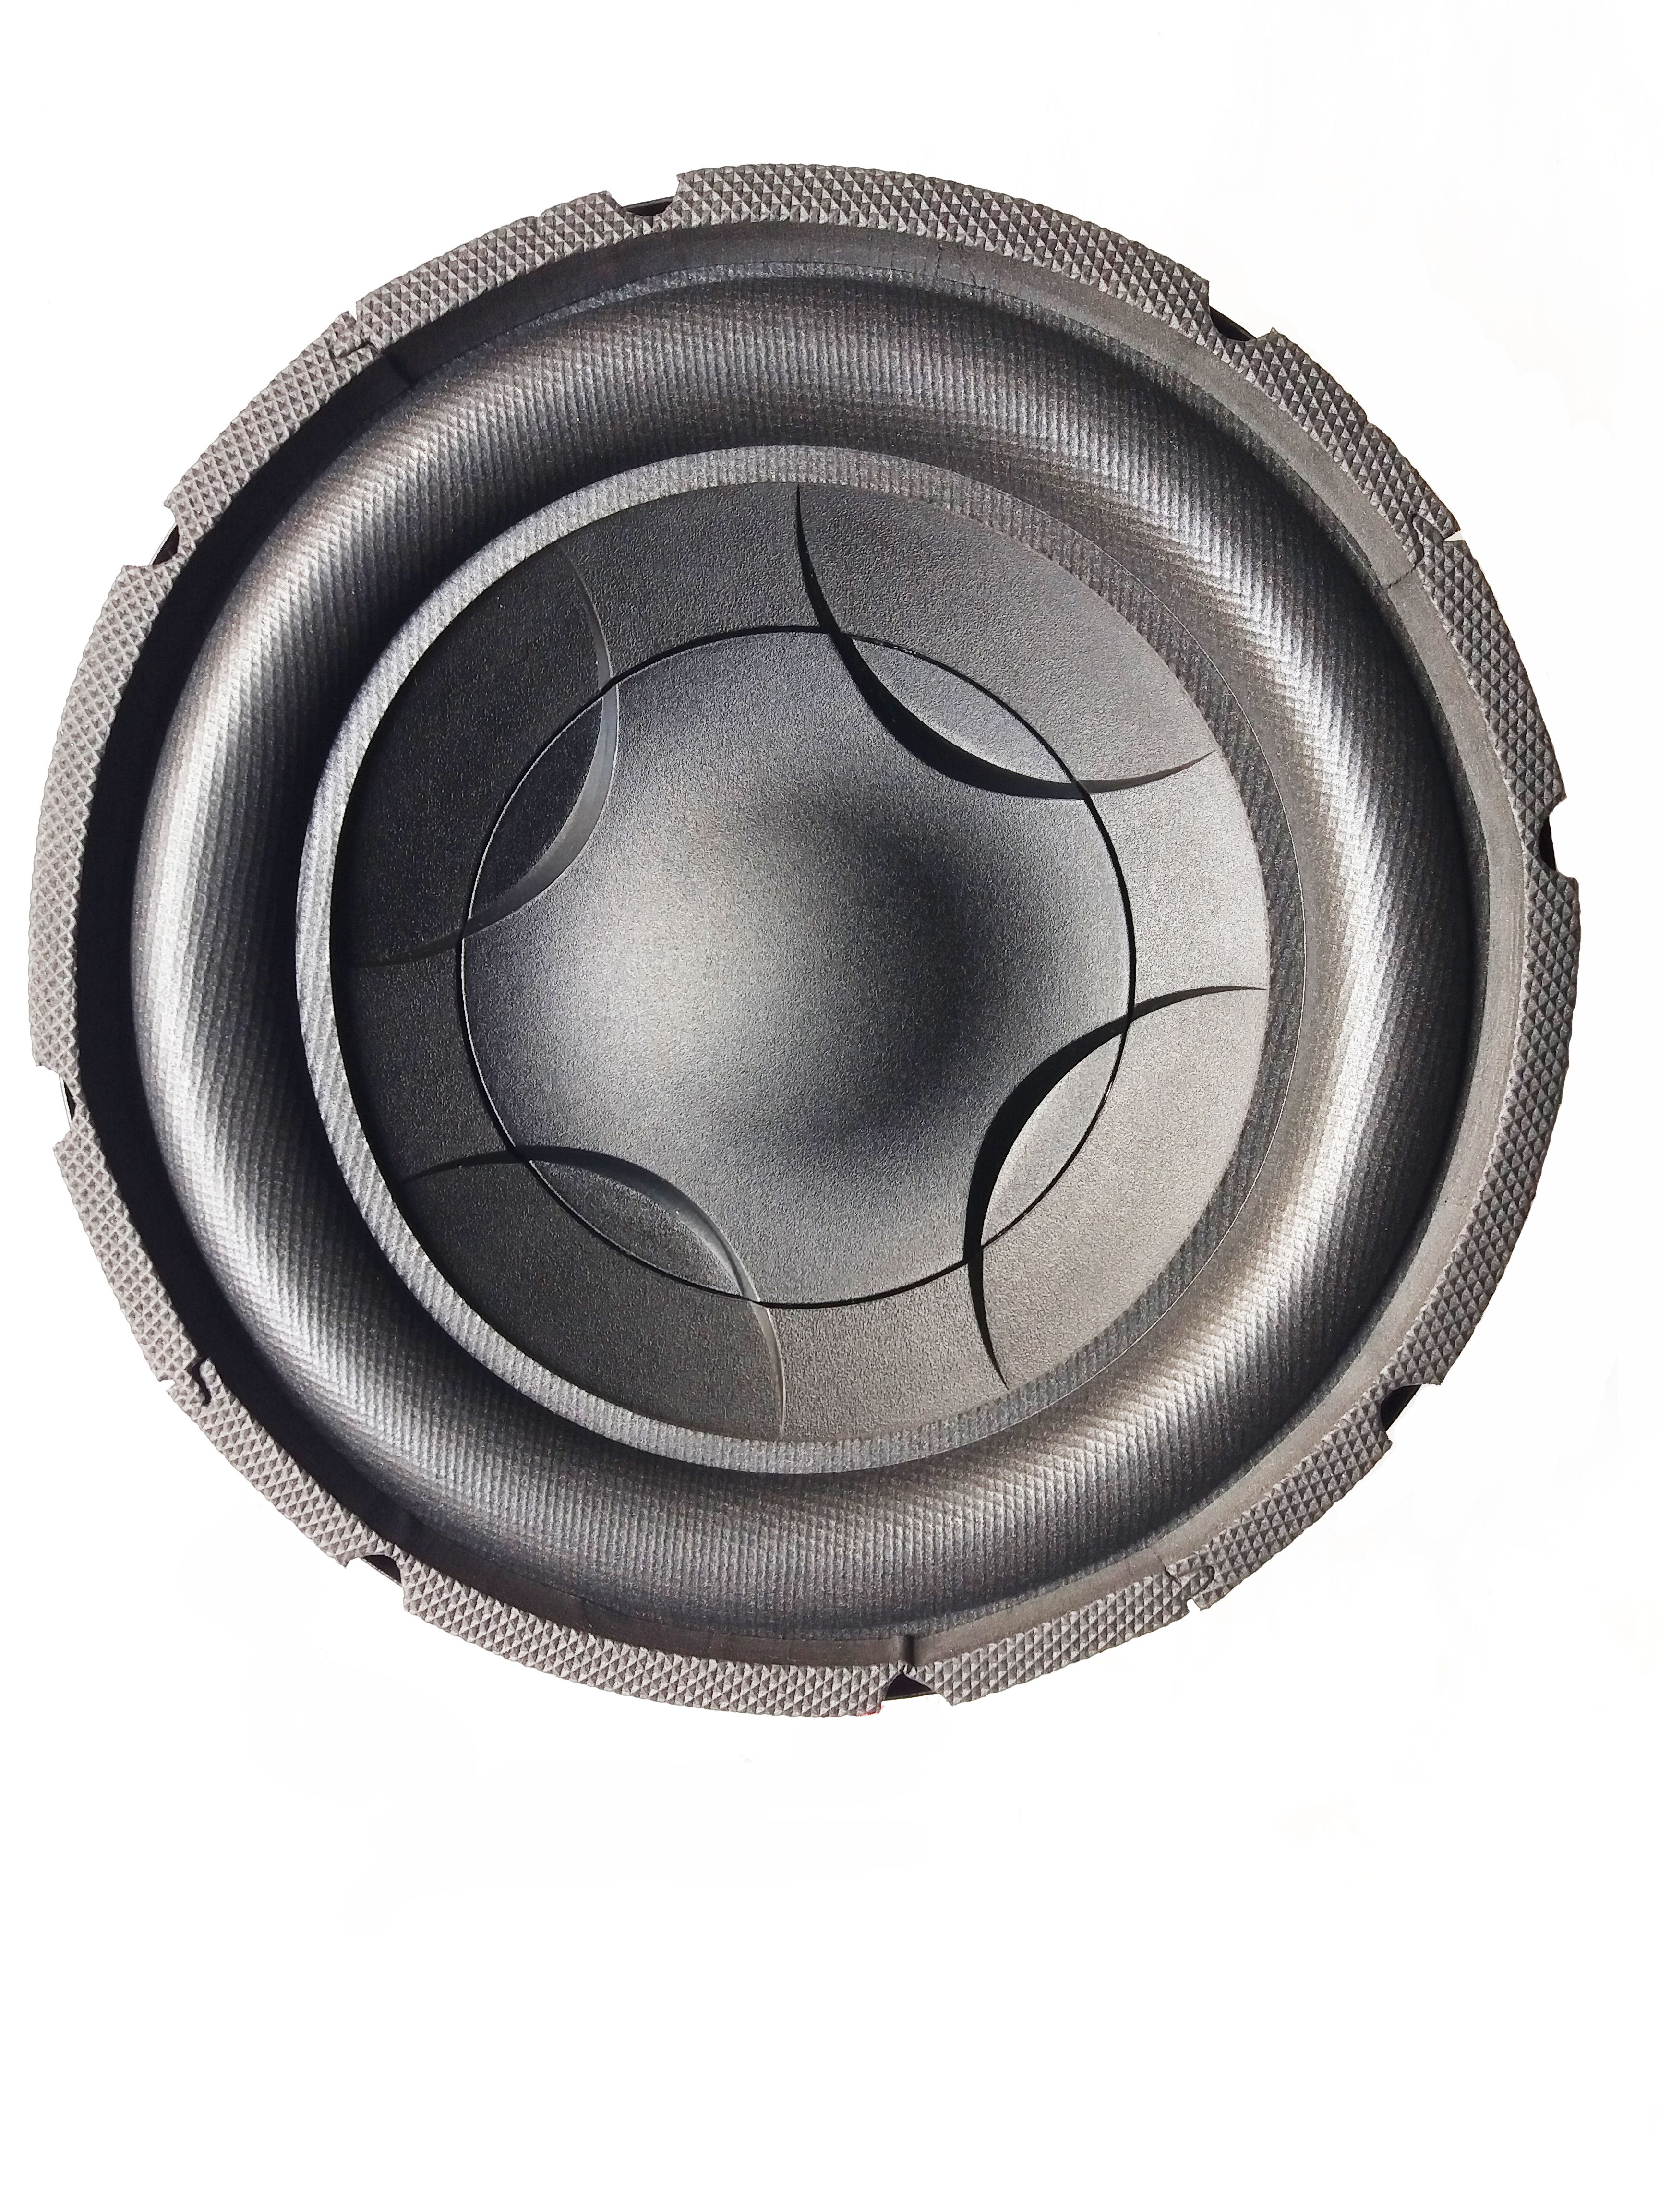 hyee subwoofer 12 inch